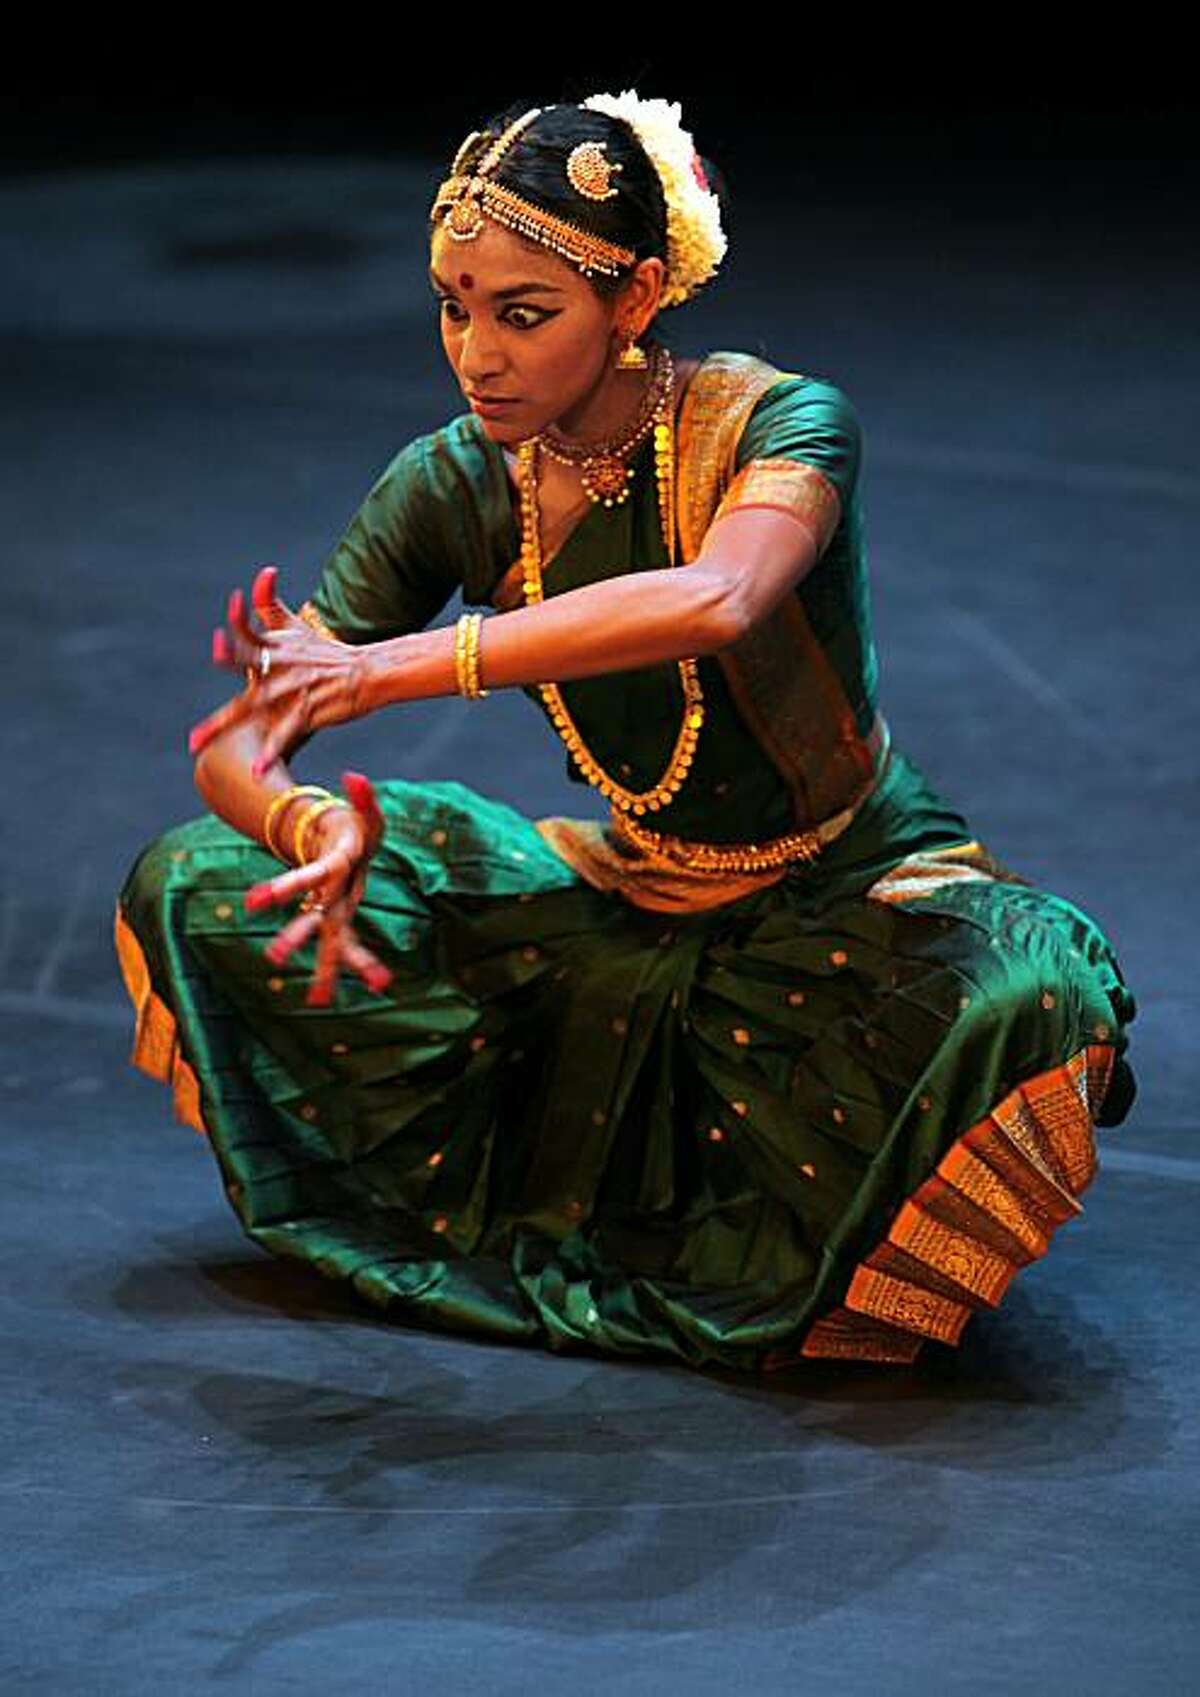 Shantala Shivalingappa, a classical Indian Kuchipudi dancer performing at Herbst Theater in San Francisco, Ca., on Thursday, February 4, 2010.